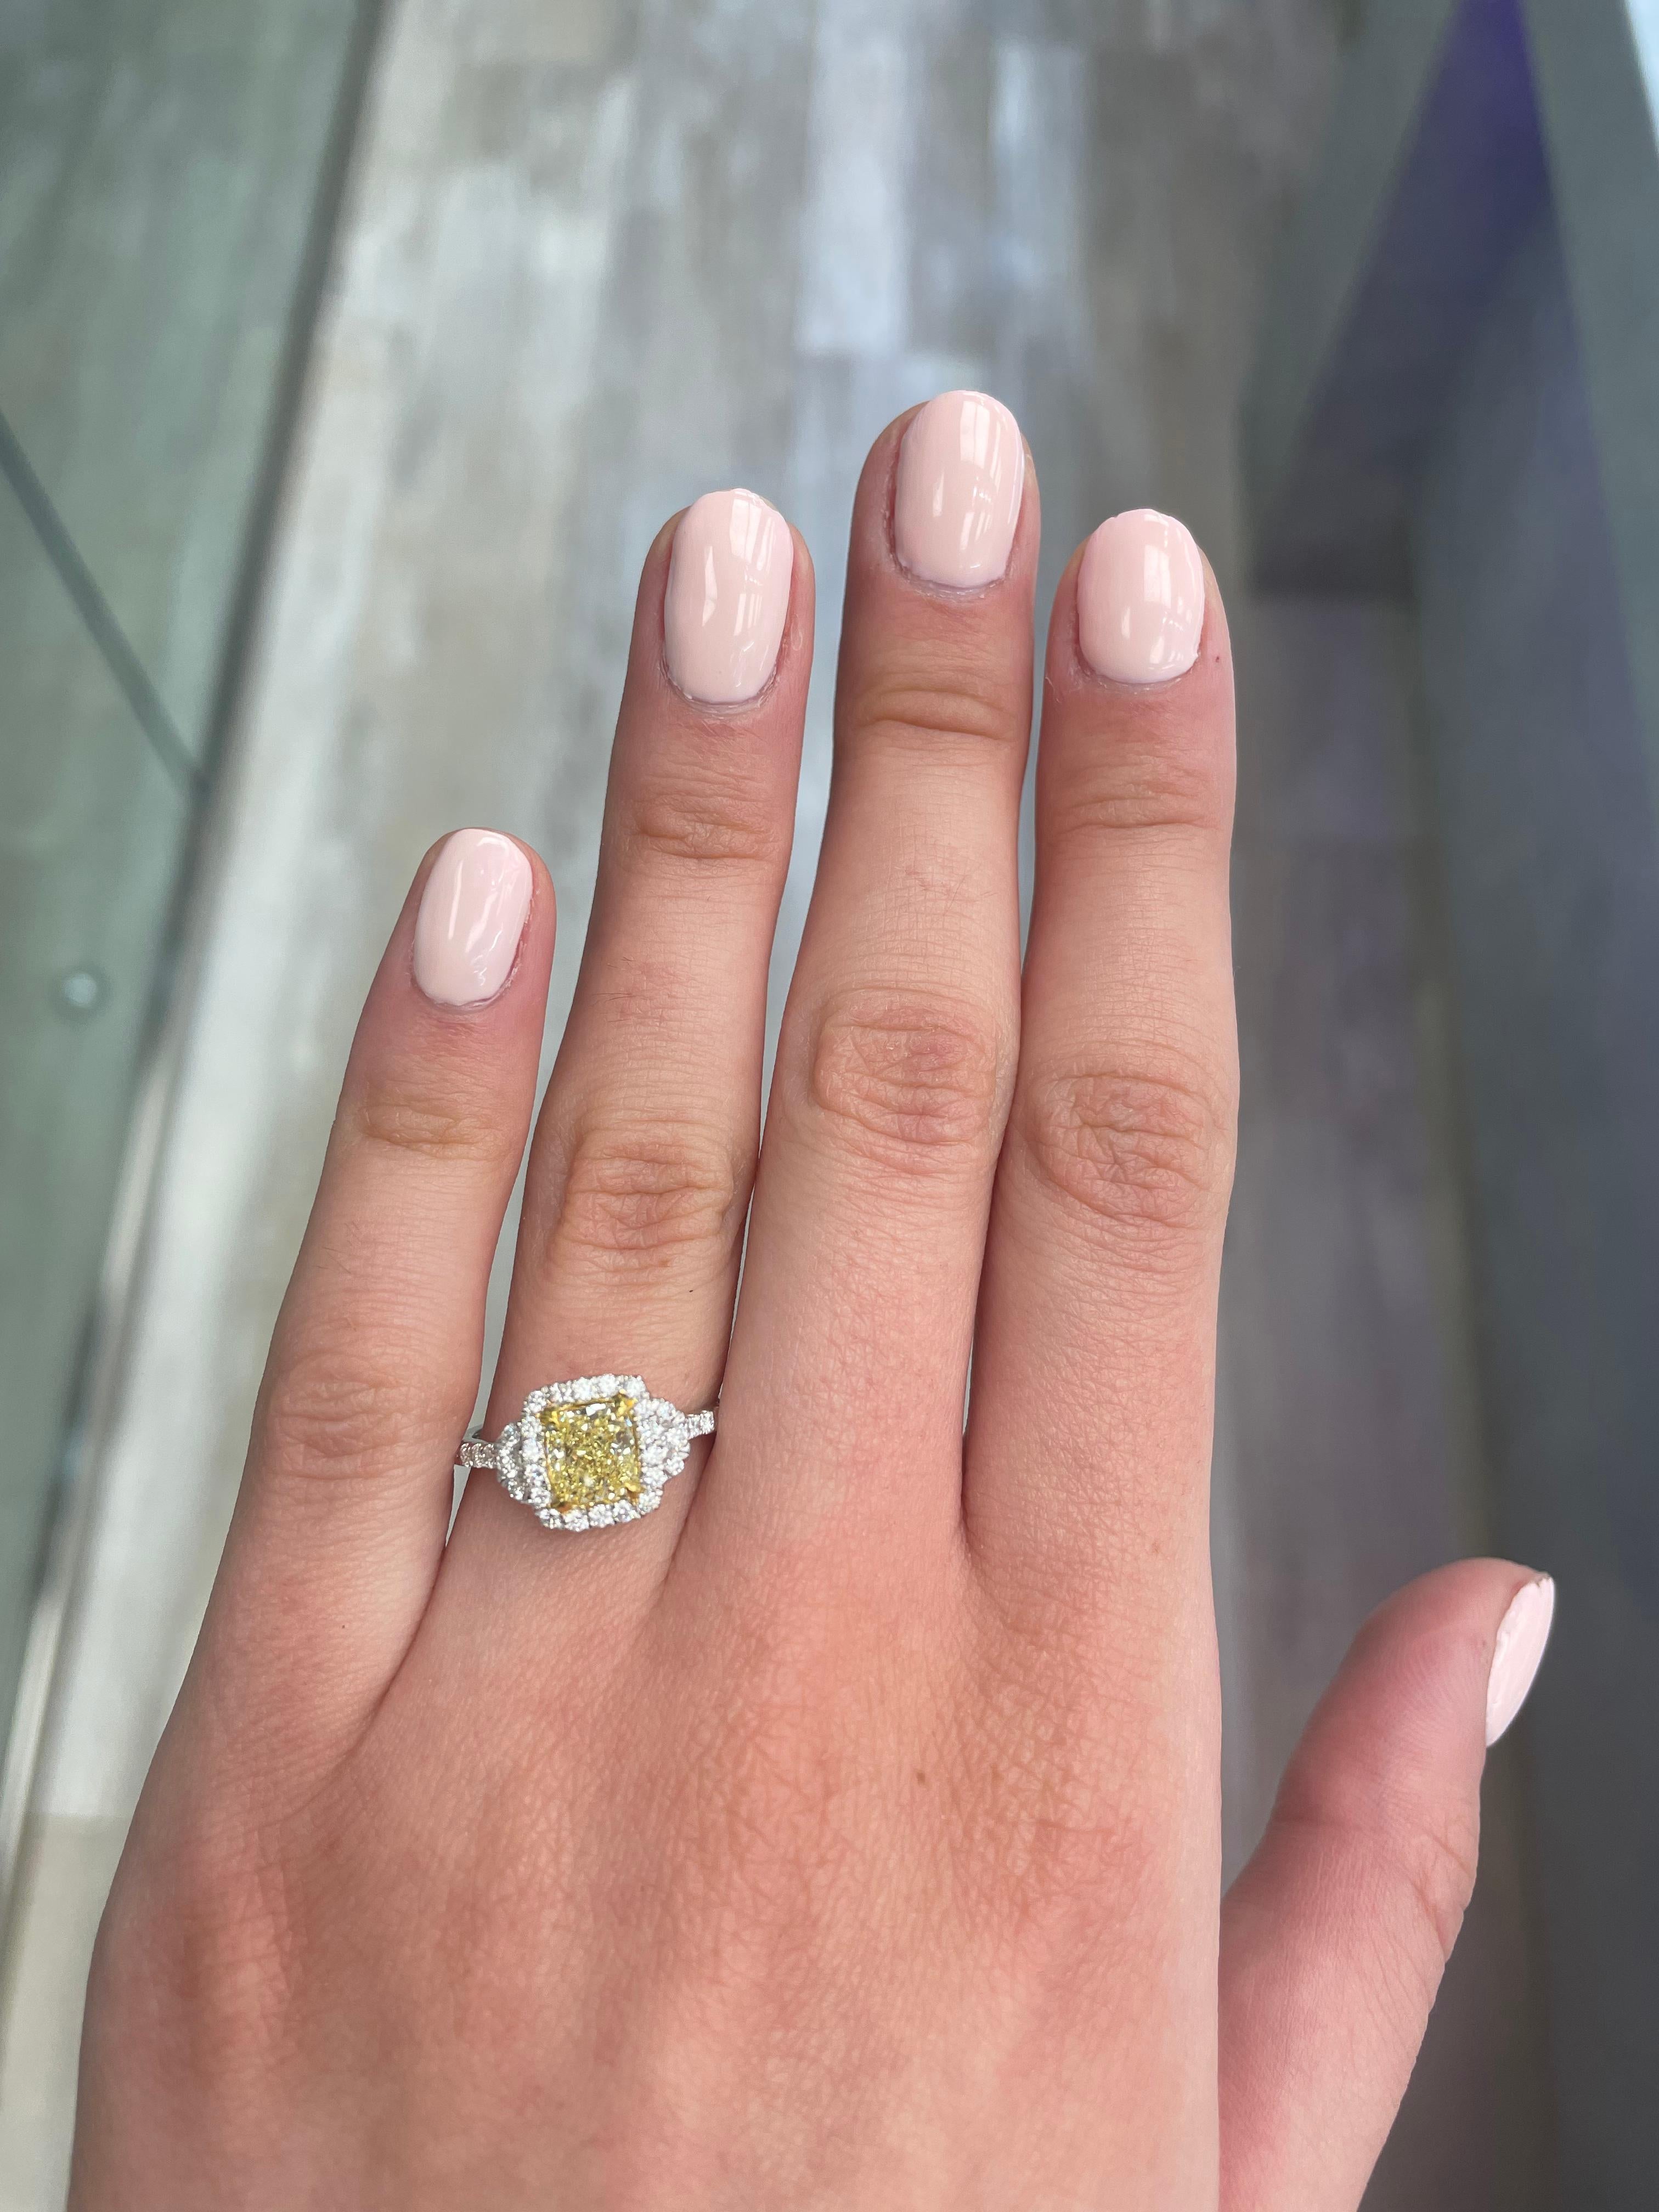 Stunning modern EGL certified yellow diamond with halo ring, two-tone 18k yellow and white gold. By Alexander Beverly Hills
1.50 carats total diamond weight.
1.07 carat cushion cut Fancy Intense Yellow color and SI2 clarity diamond, EGL graded.